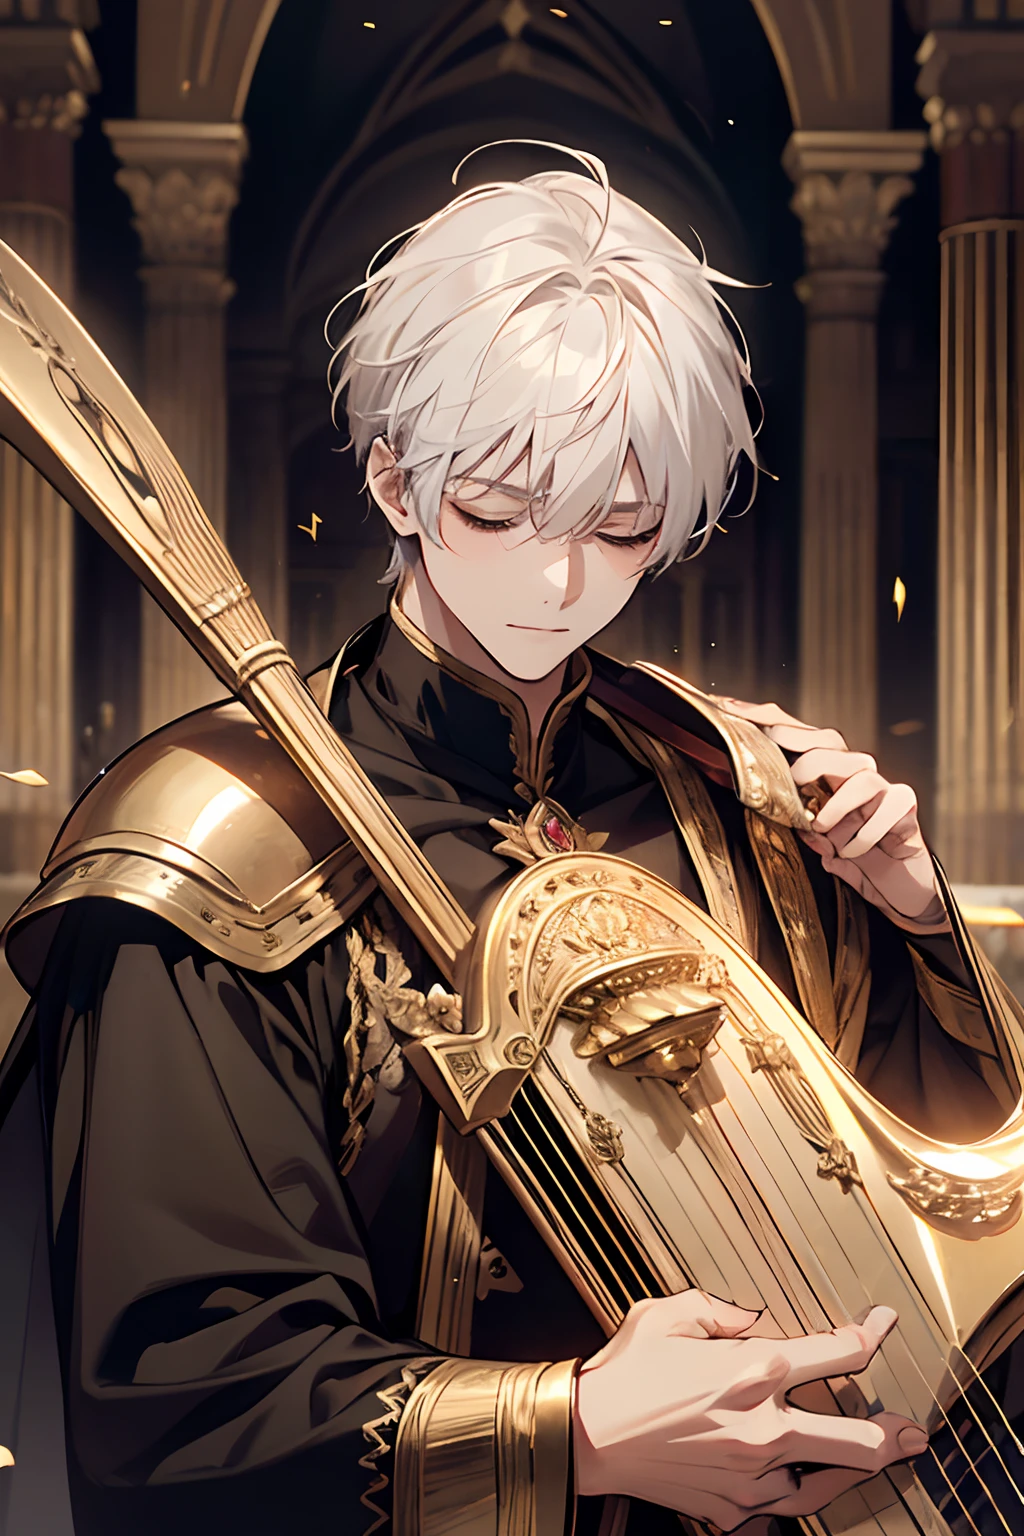 1male, holding large golden musical harp instrument against shoulder, two hands, calm, age 35 face, short messy with bangs, white hair, closed eyes, wearing black clothes, royalty, in a castle, medieval times, close up